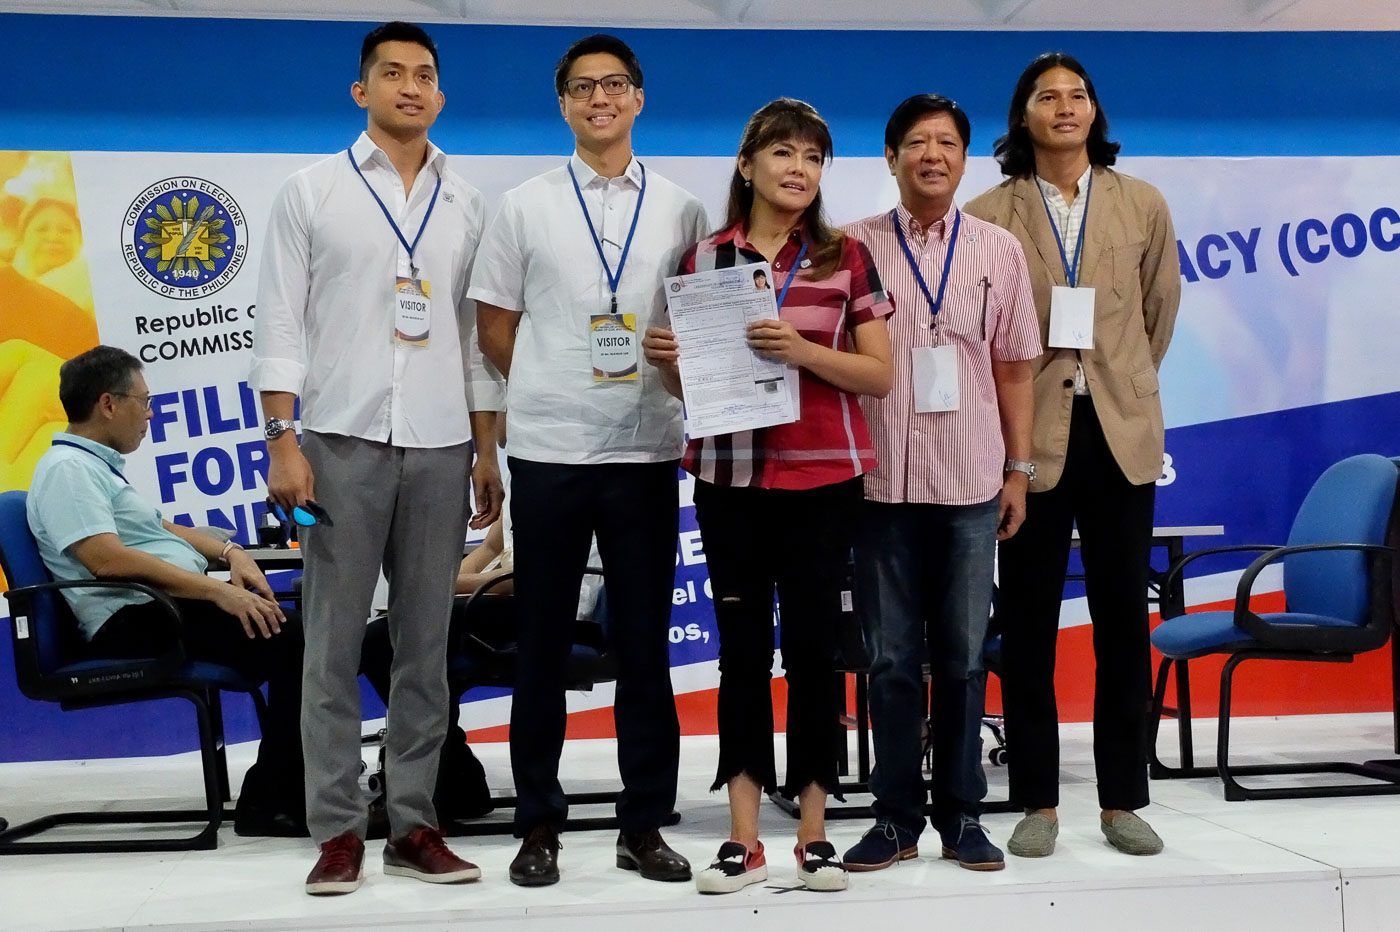 AWKWARD MOMENT. Ilocos Norte Governor Imee Marcos (center) and her family pose for a photo while human rights lawyer Jose Manuel 'Chel' Diokno (extreme right), son of an opposition leader detained during the Marcos dictatorship, file their certificates of candidacy for senator at the same time on October 16, 2018. Photo by Angie de Silva/Rappler  